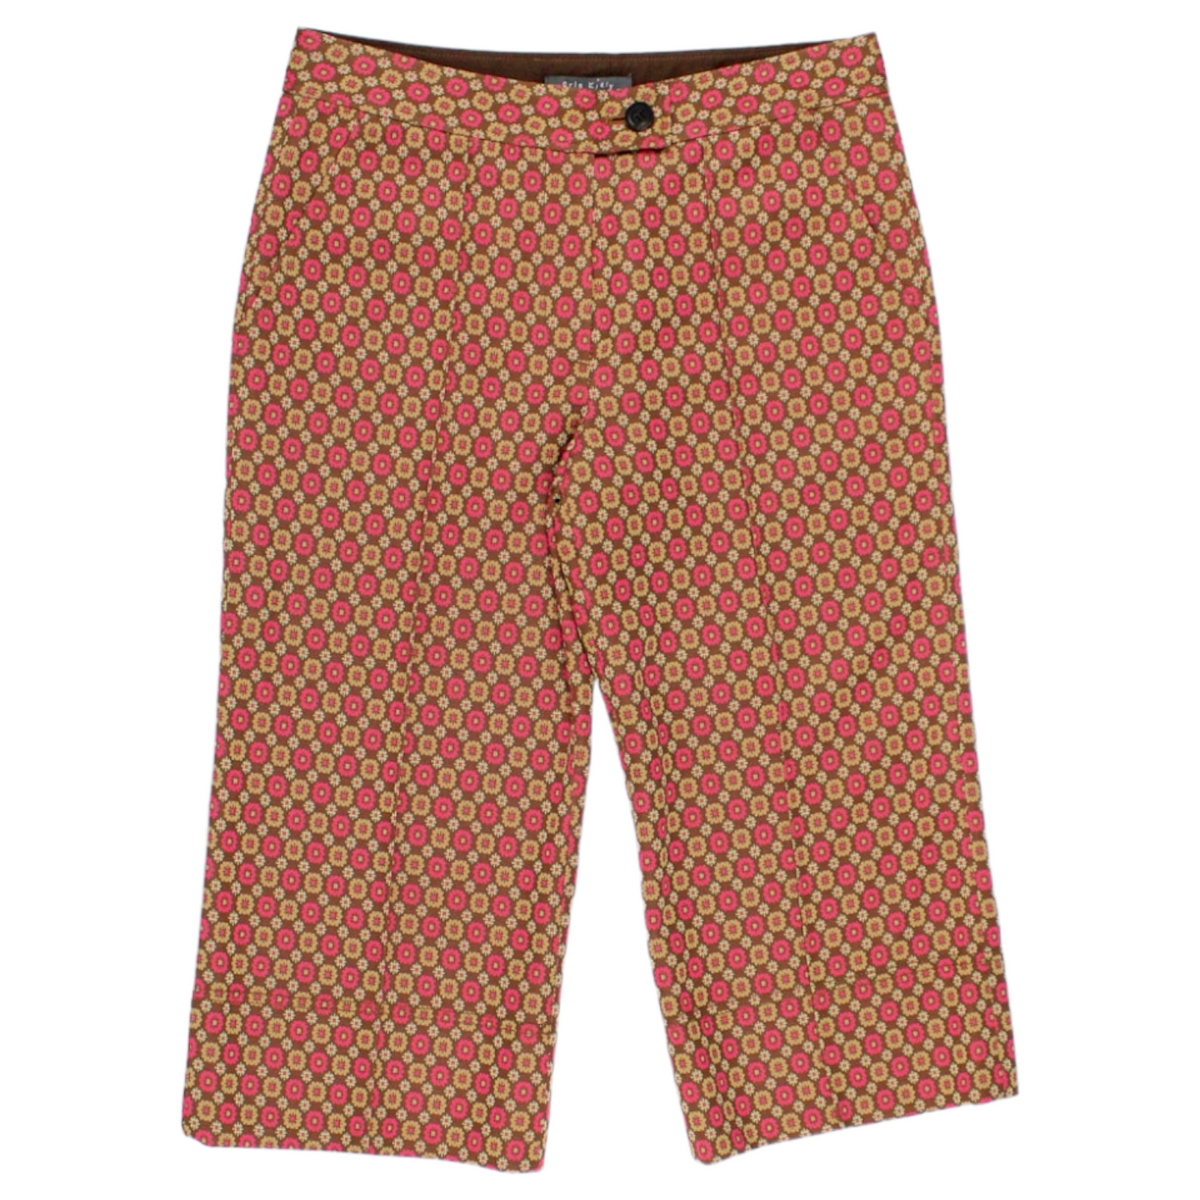 Orla Kiely Pink/Brown Cropped Trousers